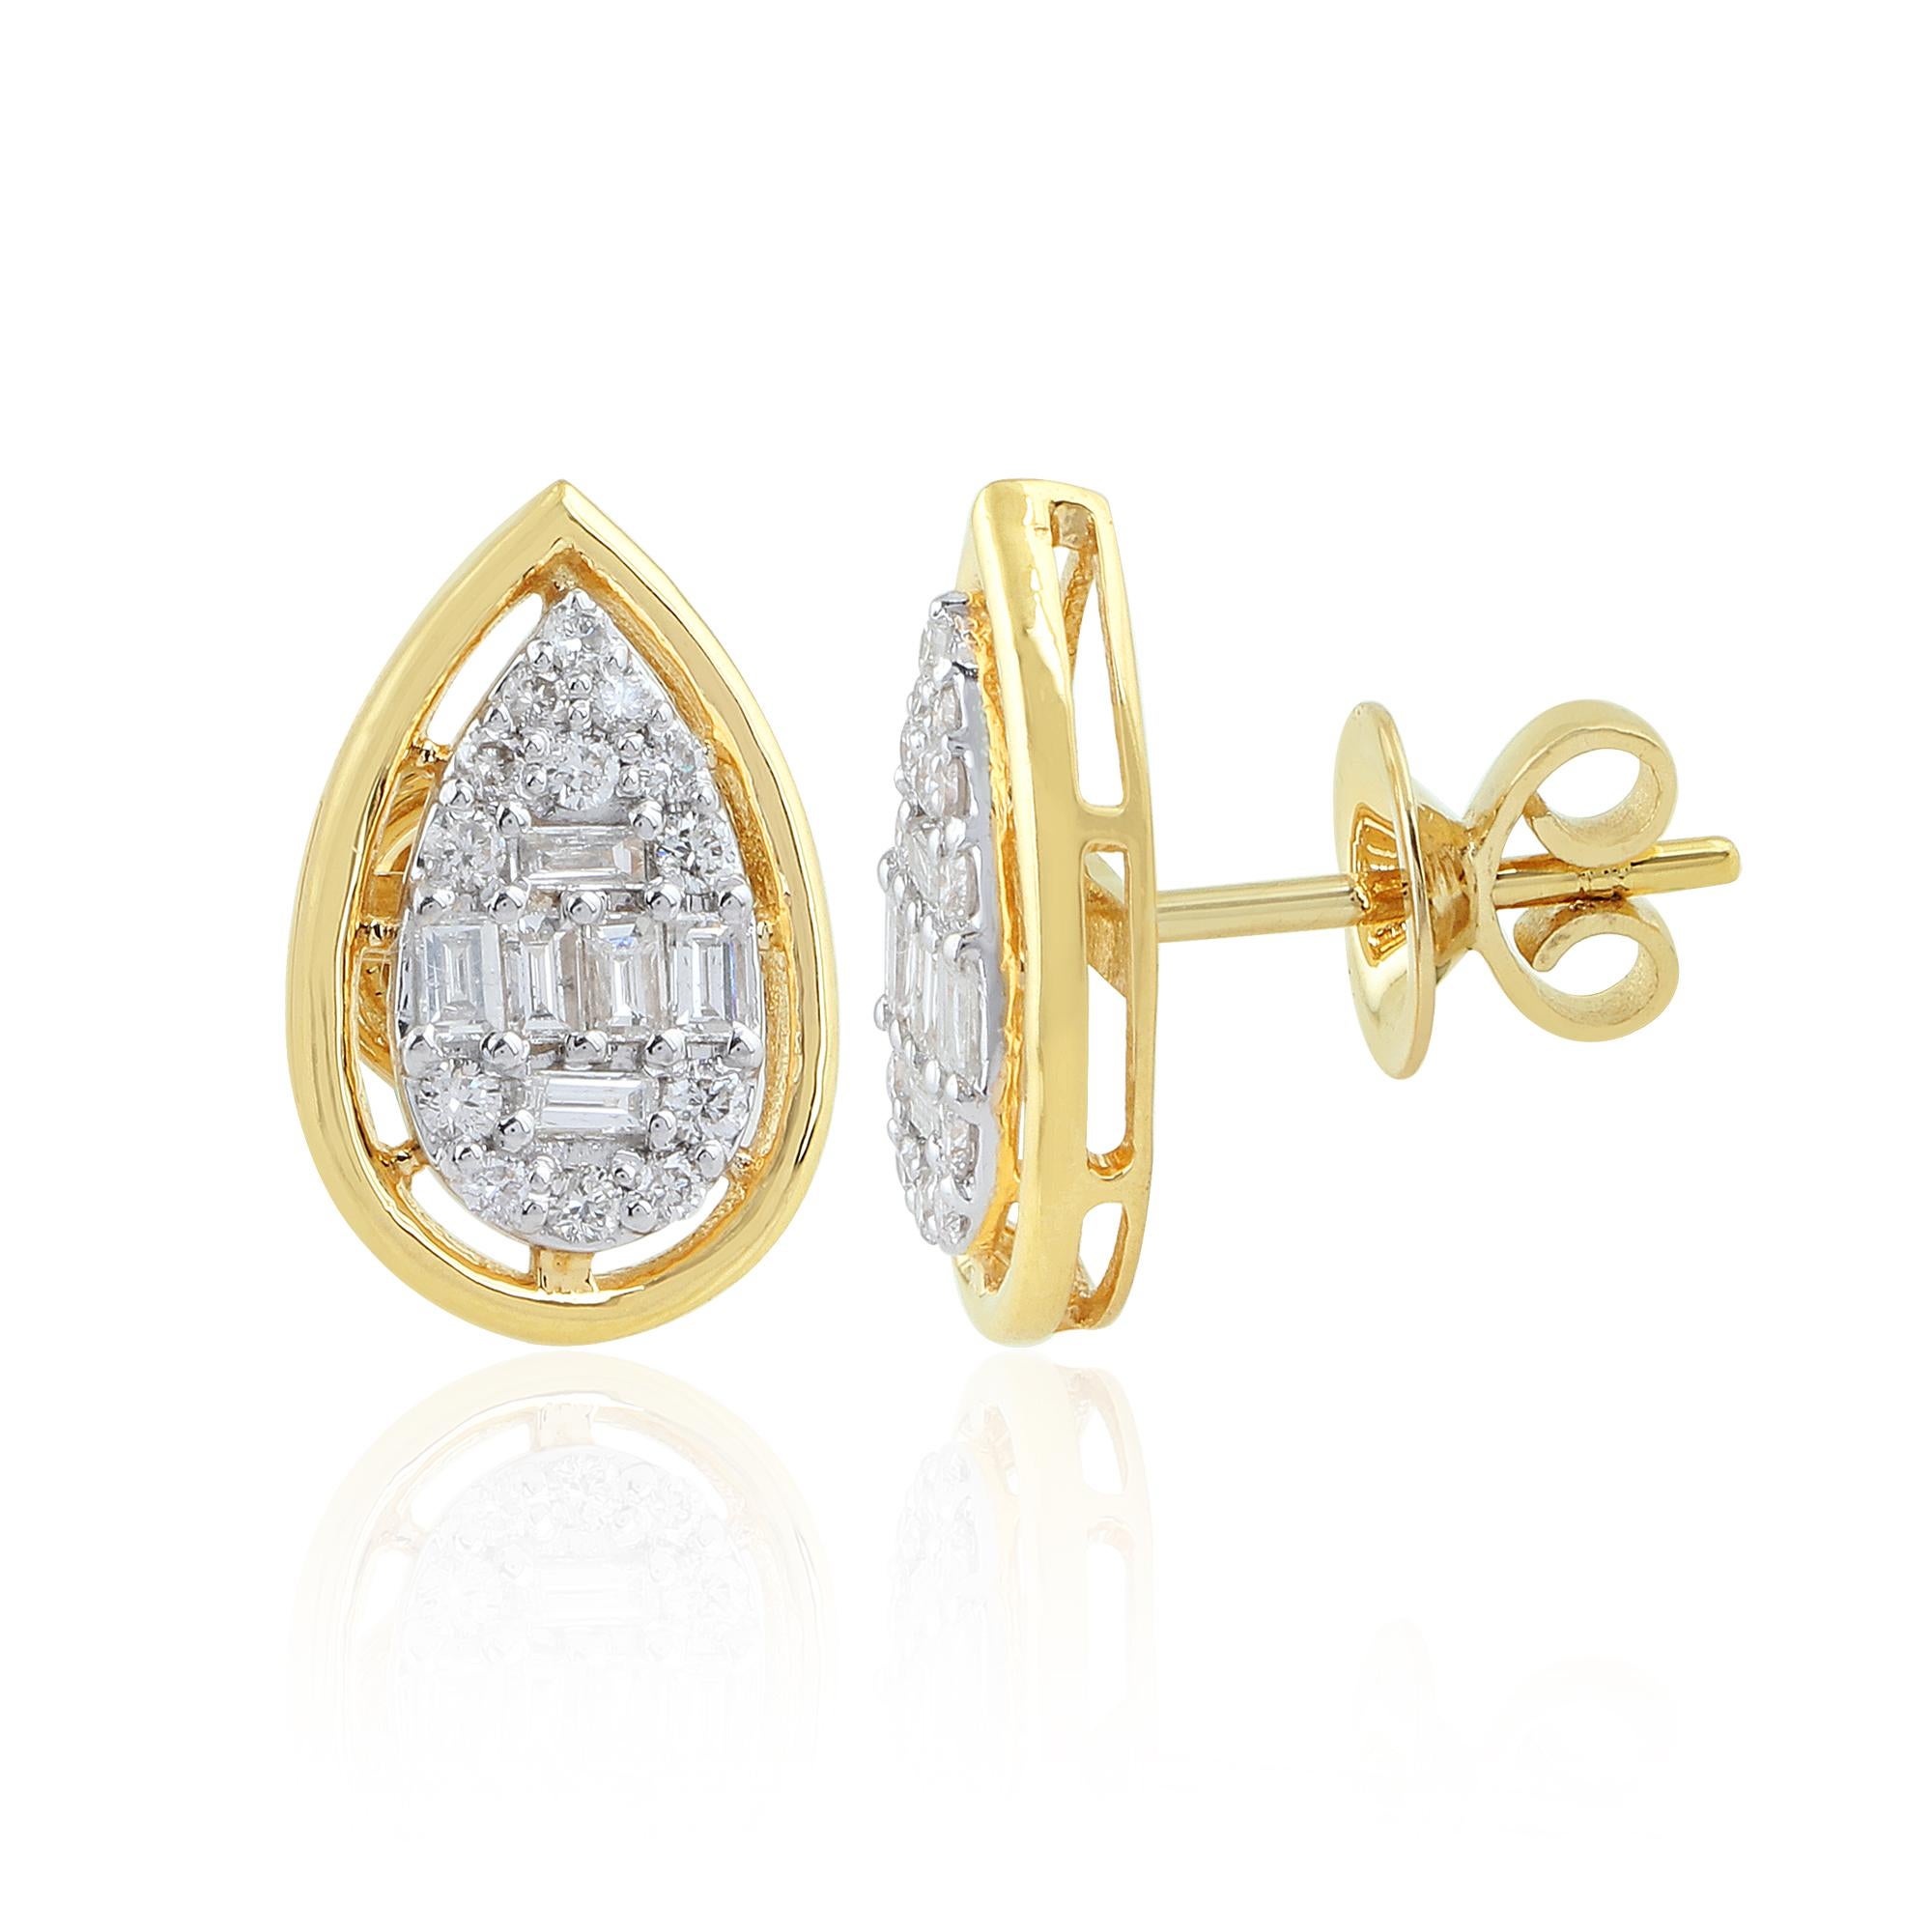 Item Code :- SEE-1487
Gross Wt. :- 4.73 gm
18k Yellow Gold Wt. :- 4.59 gm
Diamond Wt. :- 0.71 Ct. ( AVERAGE DIAMOND CLARITY SI1-SI2 & COLOR H-I )
Earrings Size :- 17 mm approx.
✦ Sizing
.....................
We can adjust most items to fit your